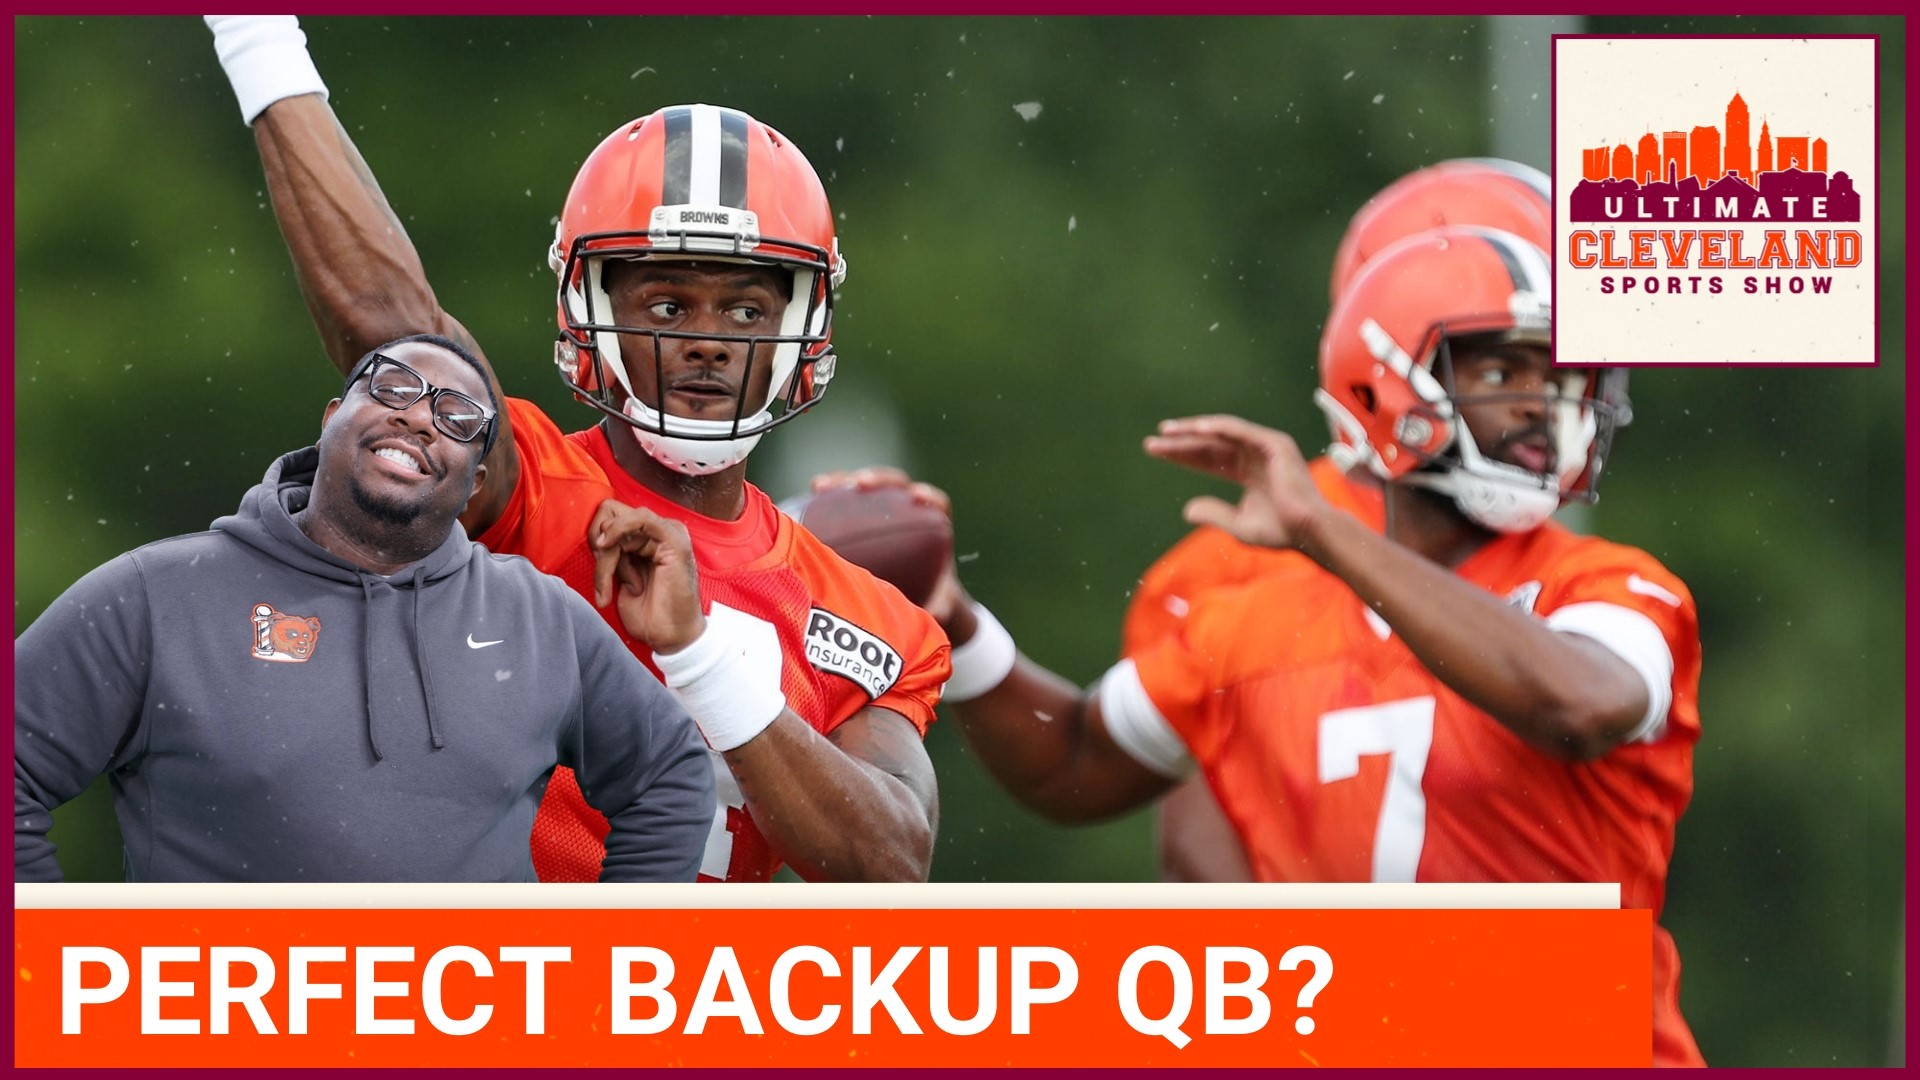 With Deshaun Watson being suspended for at least 6 games, Jacoby Brissett will have to lead the Cleveland Browns until week seven.